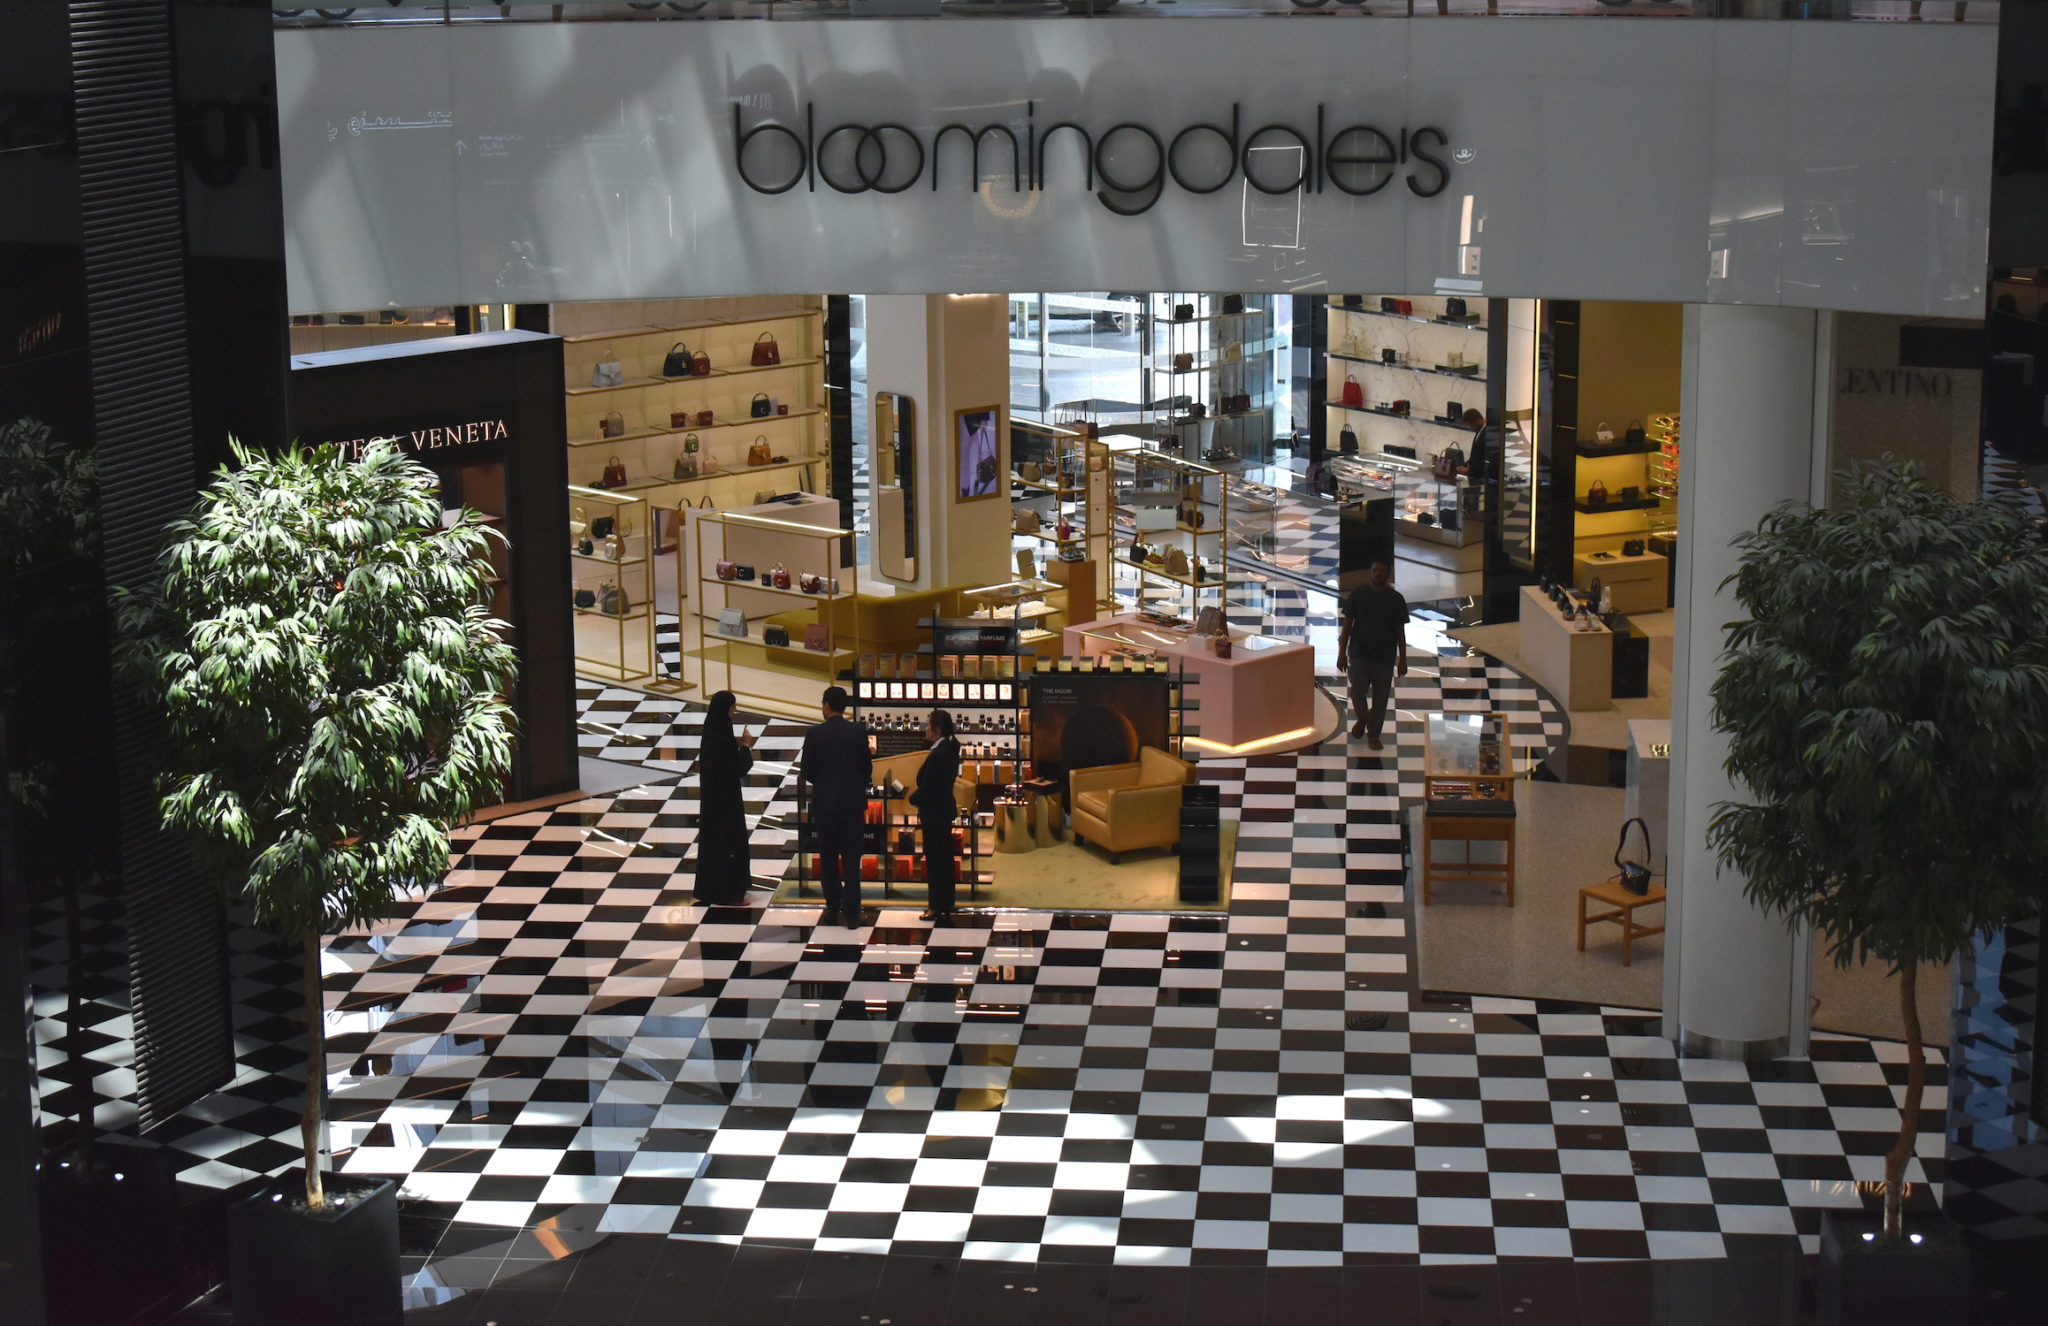 Bloomingdale's Embraces Retail Industry's 'Small Format Store' Trend